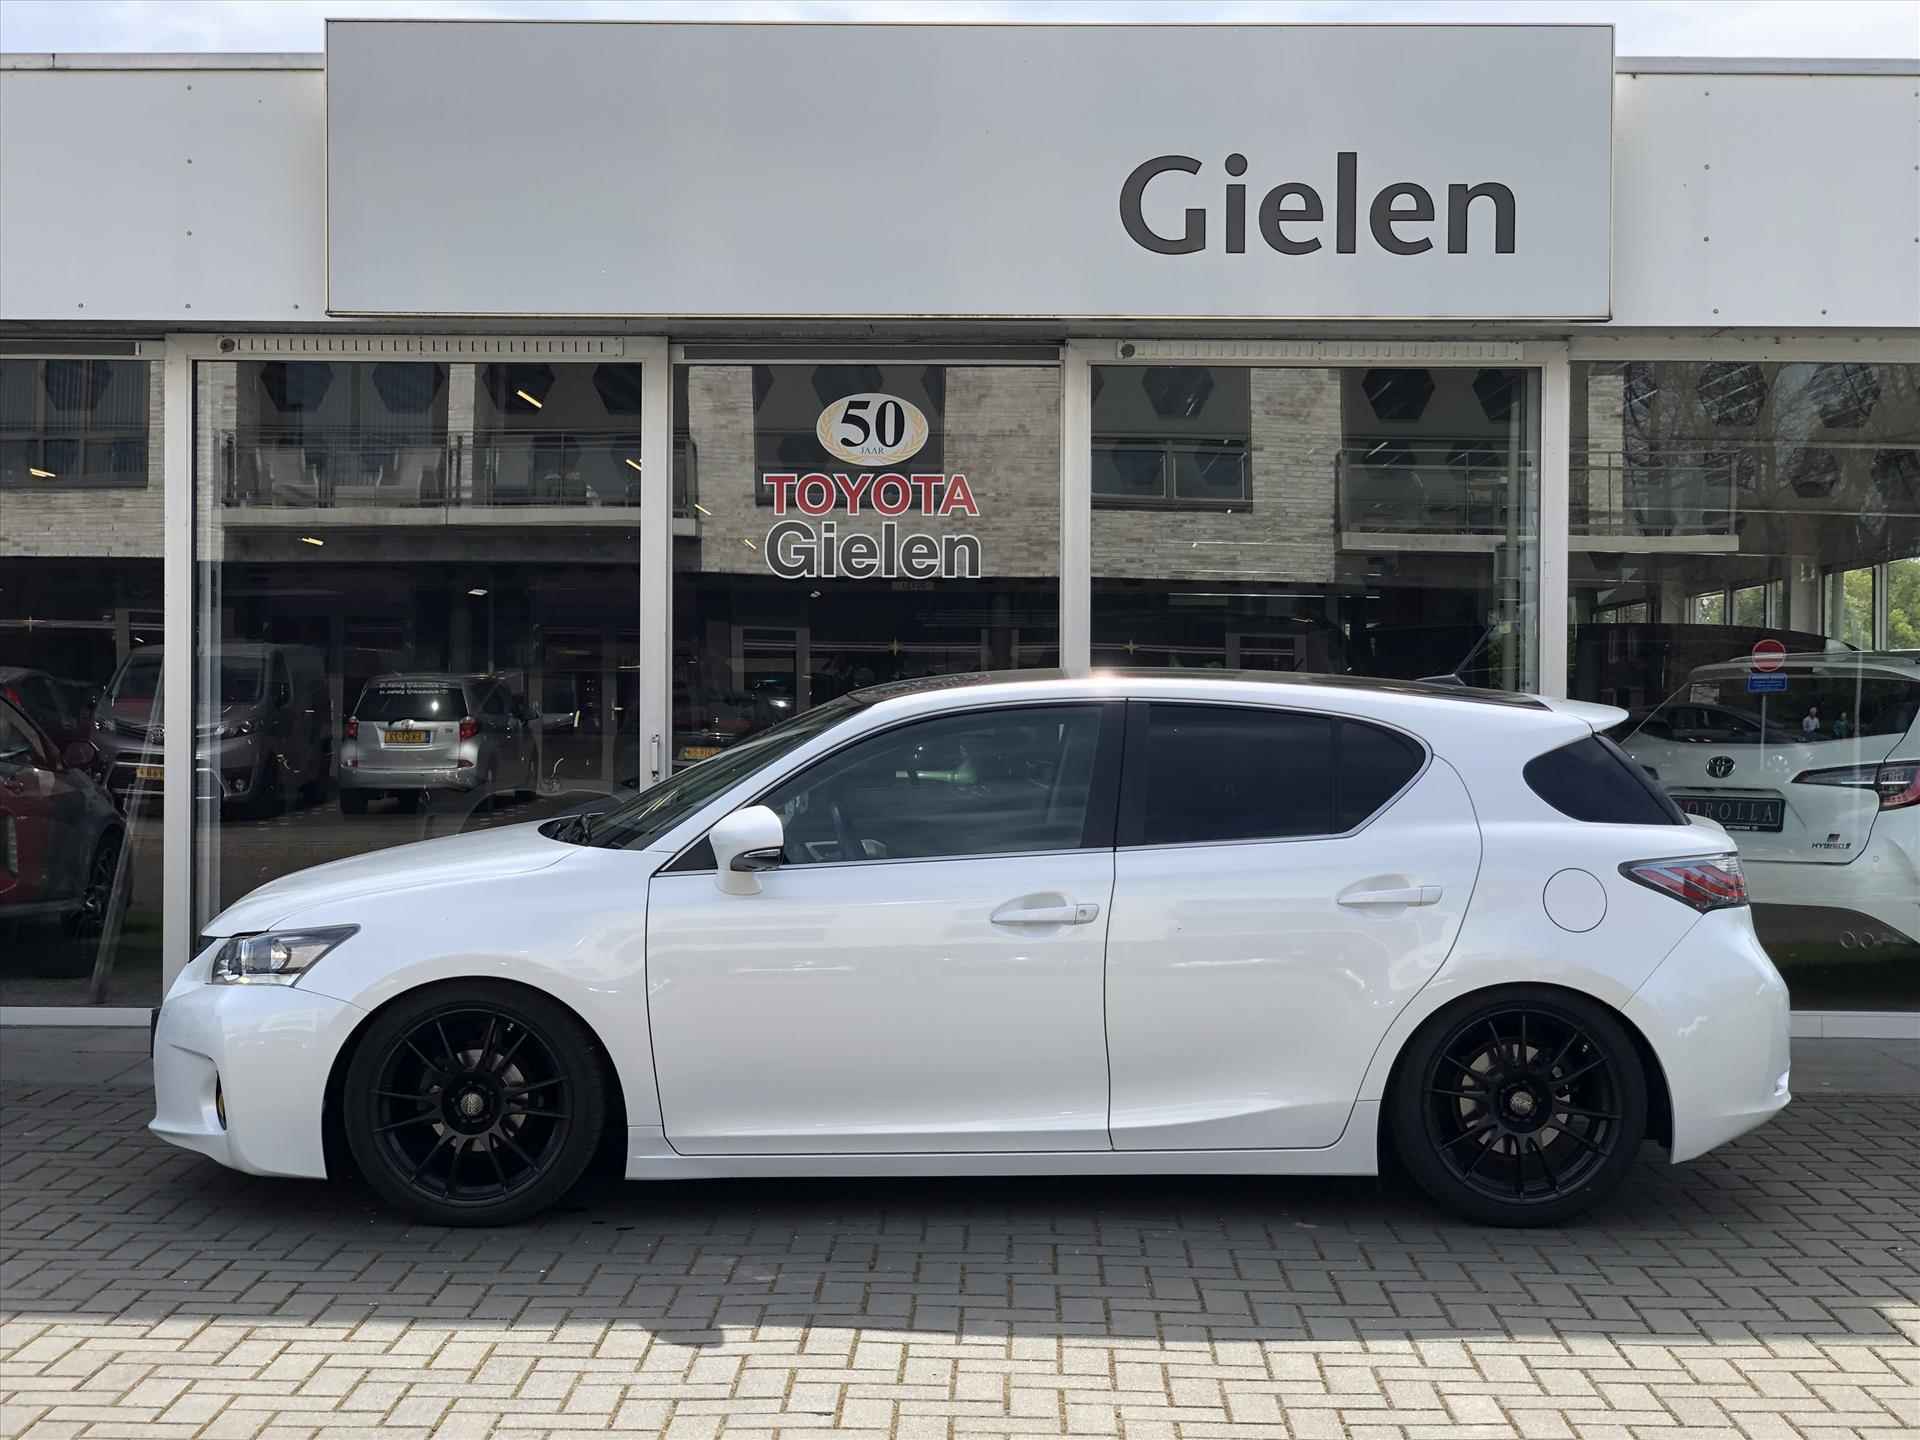 Lexus Ct 200h Business Line Pro F Sport Grill | Parkeercamera, Keyless, Cruise control, 18 inch, Privacy Glass, Zeer compleet! - 10/39